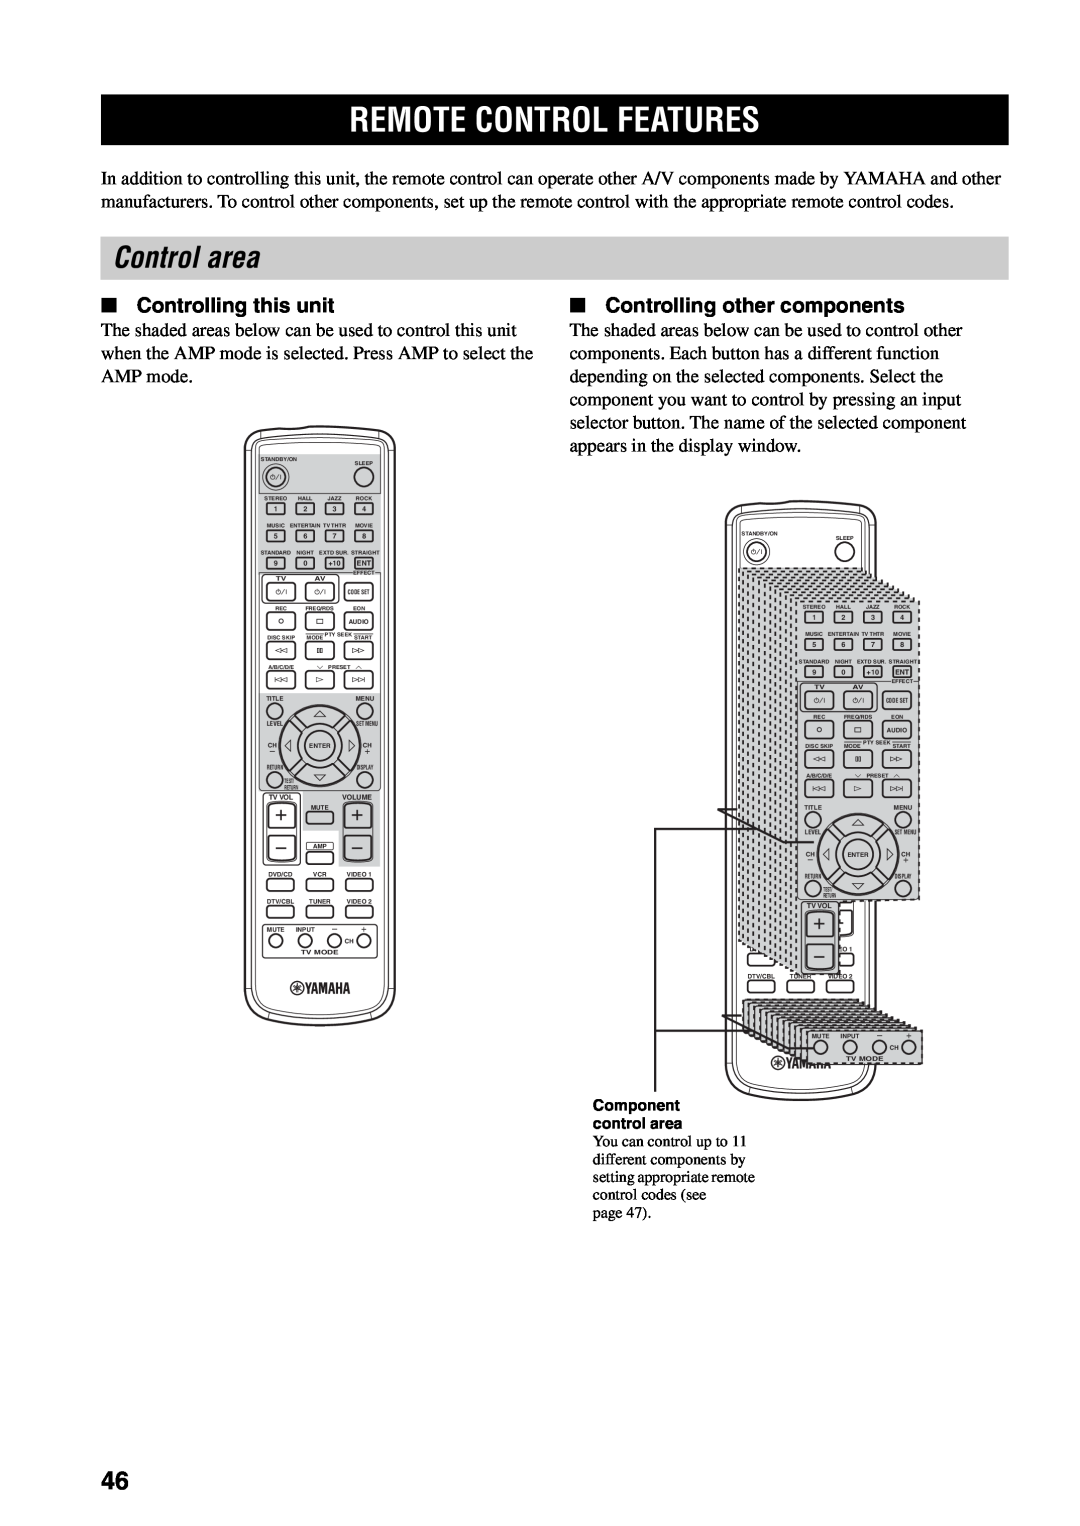 Yamaha RX-SL80 owner manual Remote Control Features, Control area, Controlling this unit, Controlling other components 